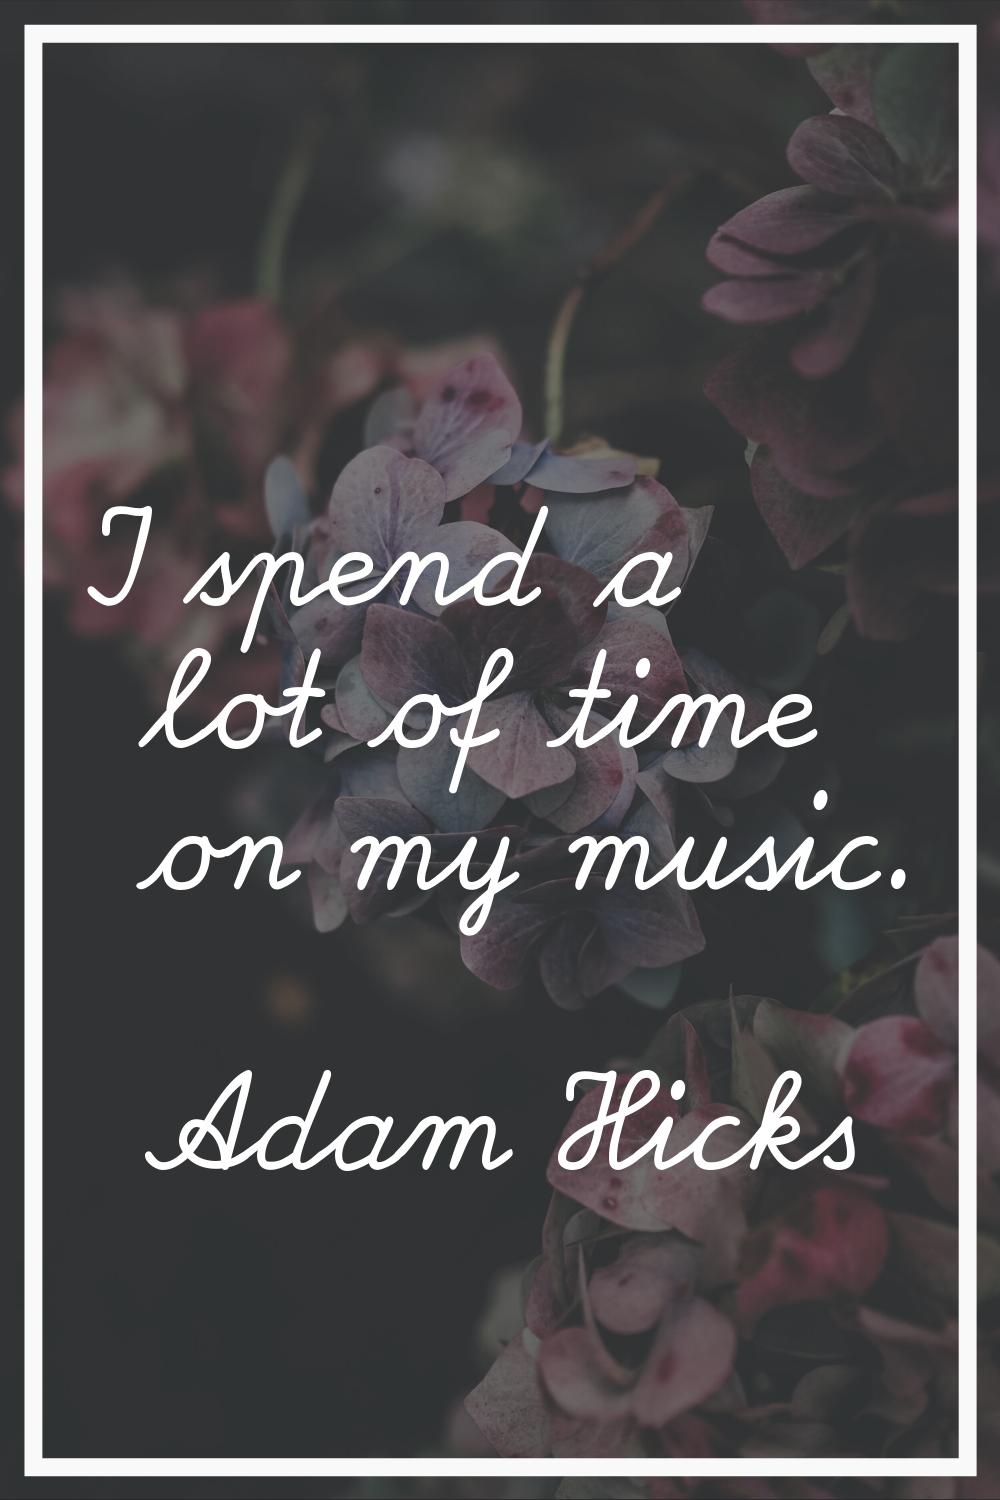 I spend a lot of time on my music.